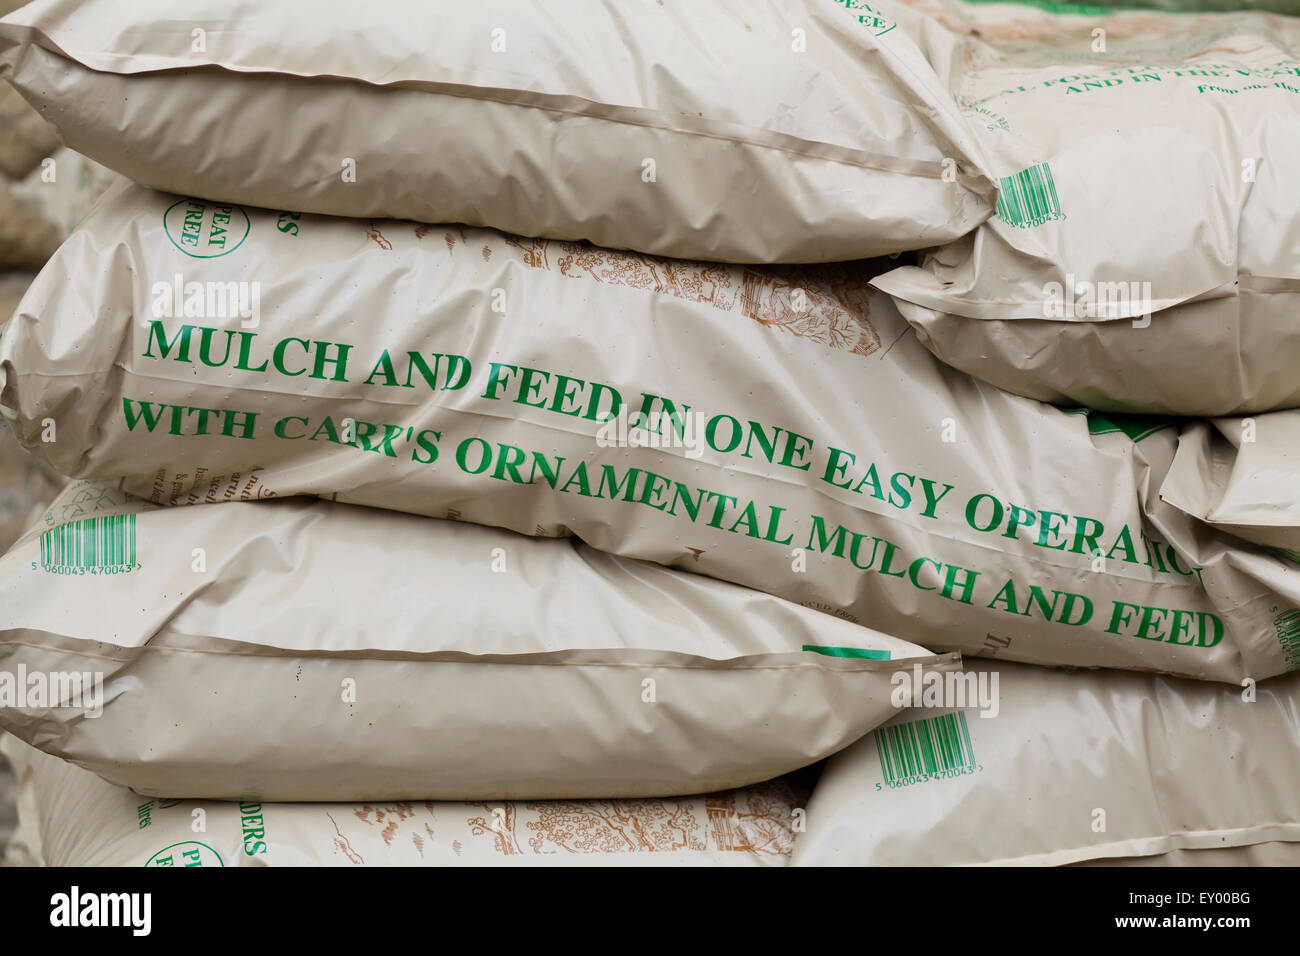 Stacked Bags Mulch and feed Stock Photo